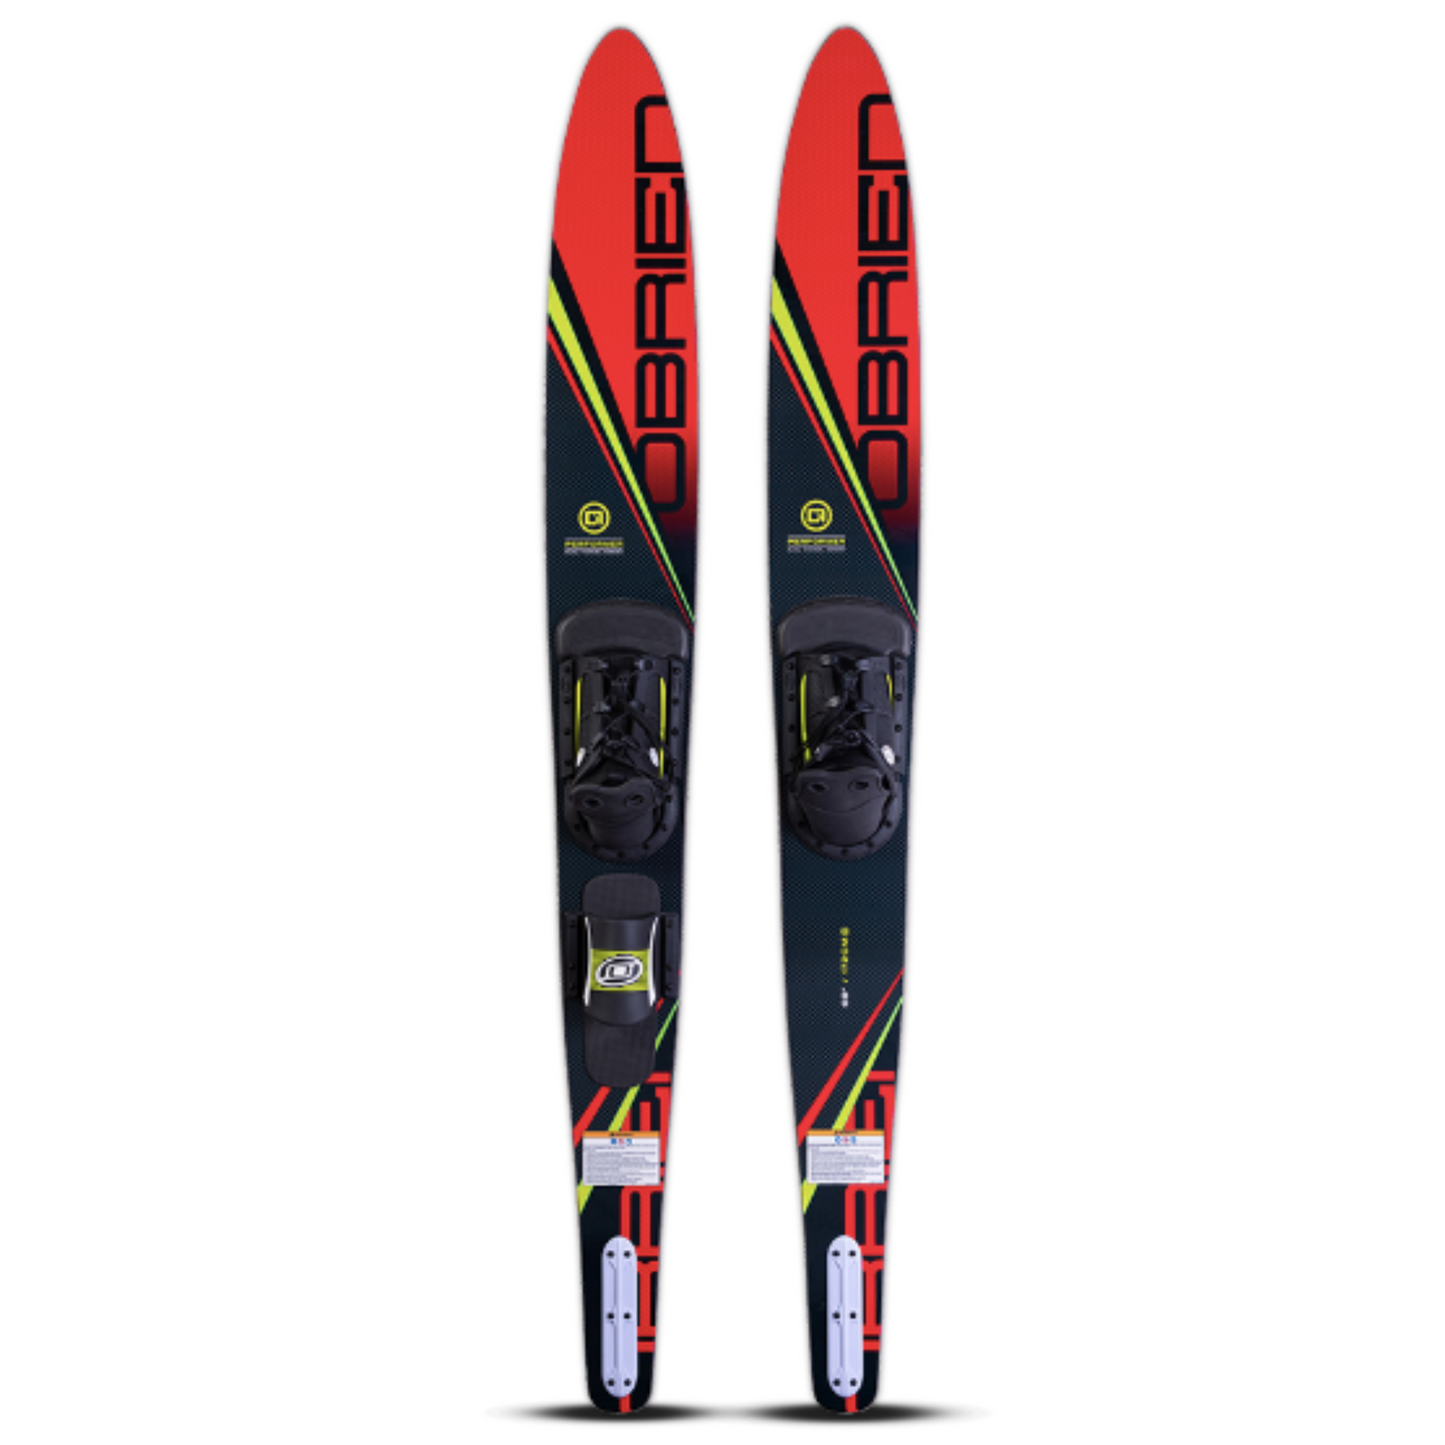 O'Brien Celebrity 68" combo waterskis in red